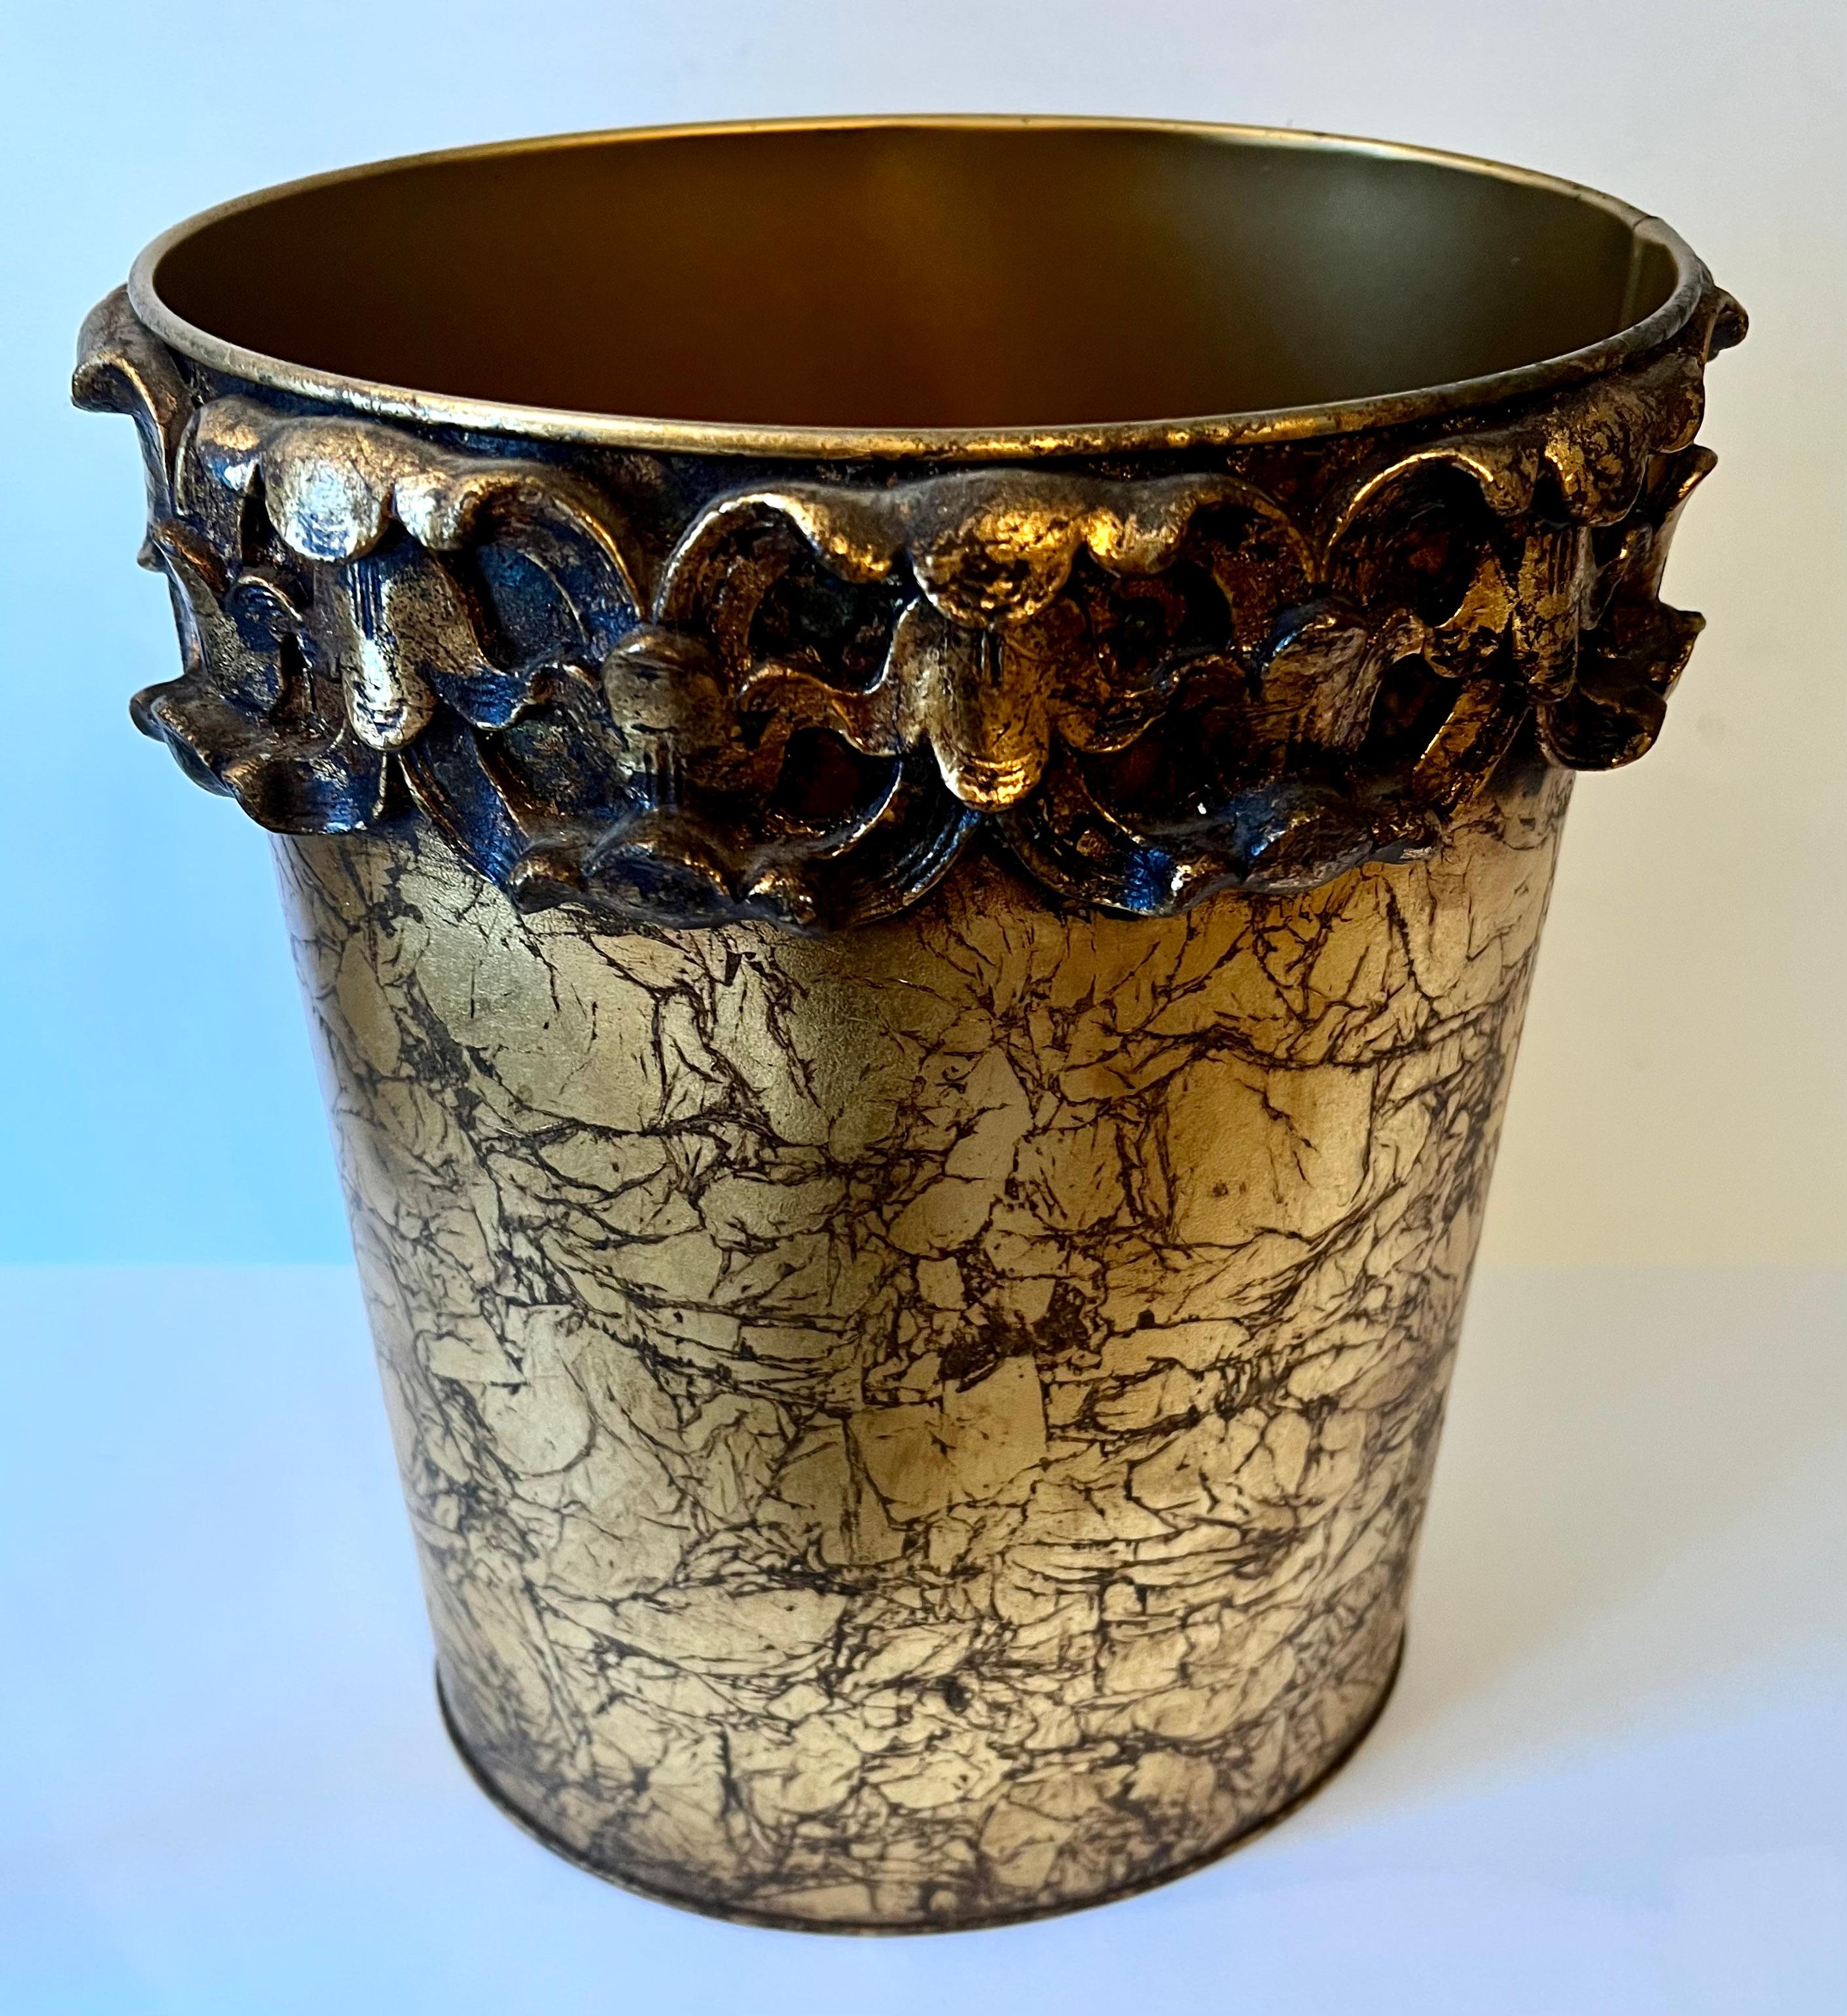 A Oval gold metal waste bin or can. The piece is very mid century, Hollywood regency. a wonderful addition to the guest room, bathroom or office. The gold is variegated and has a floral style relief around the top as a band... very nice.